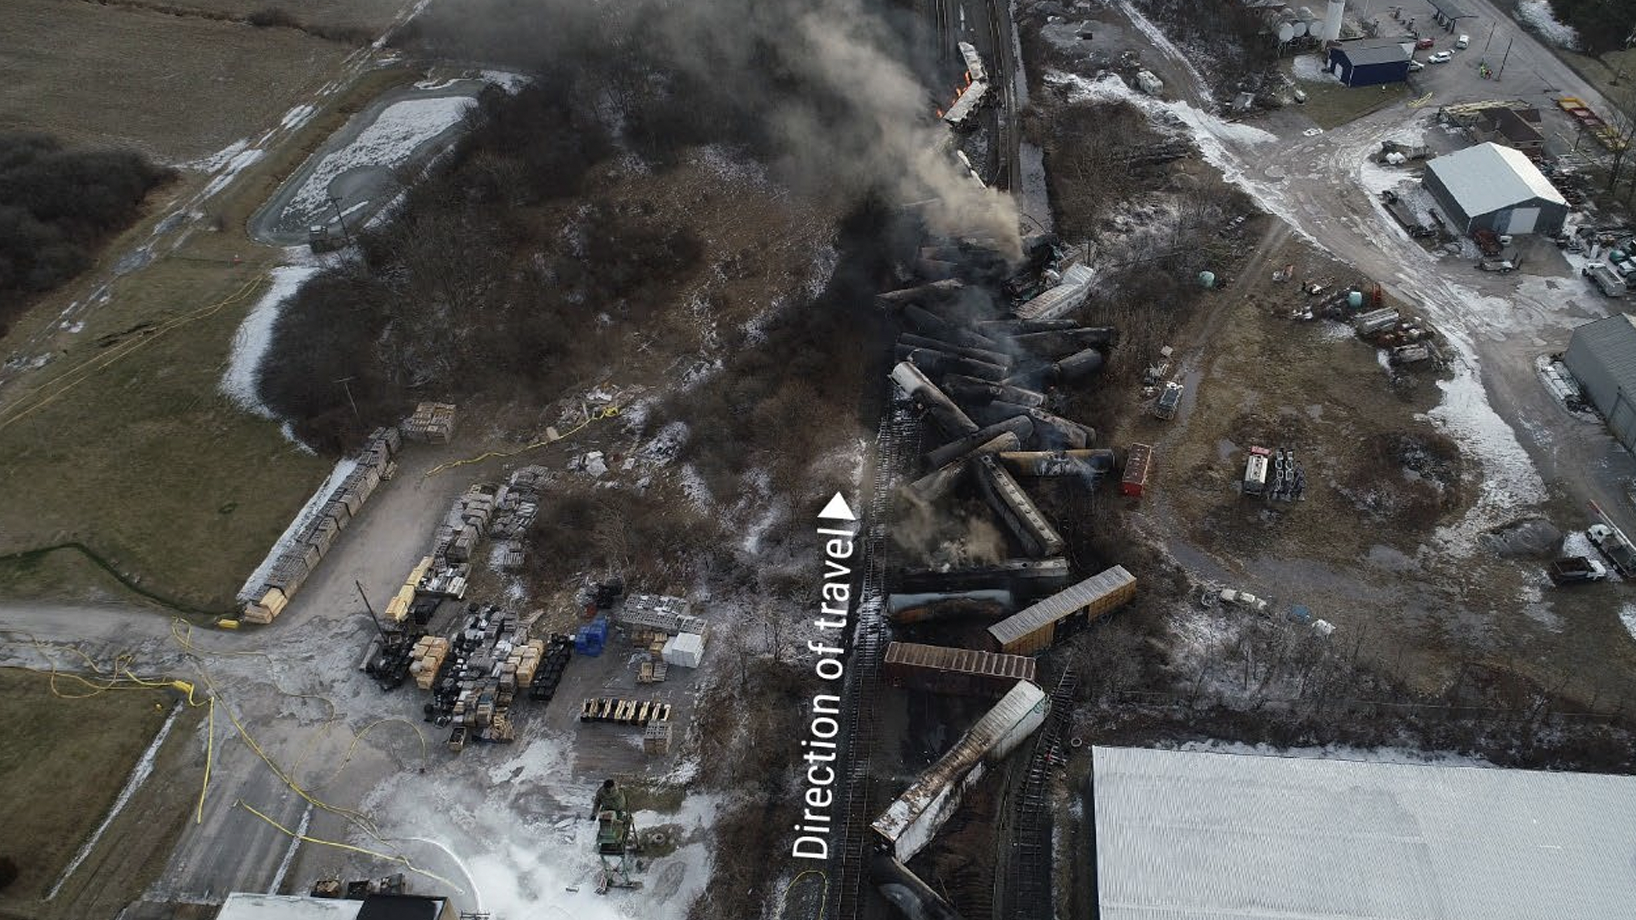 Aerial photograph of the East Palestine, Ohio, derailment site, courtesy of the National Transportation Safety Board.